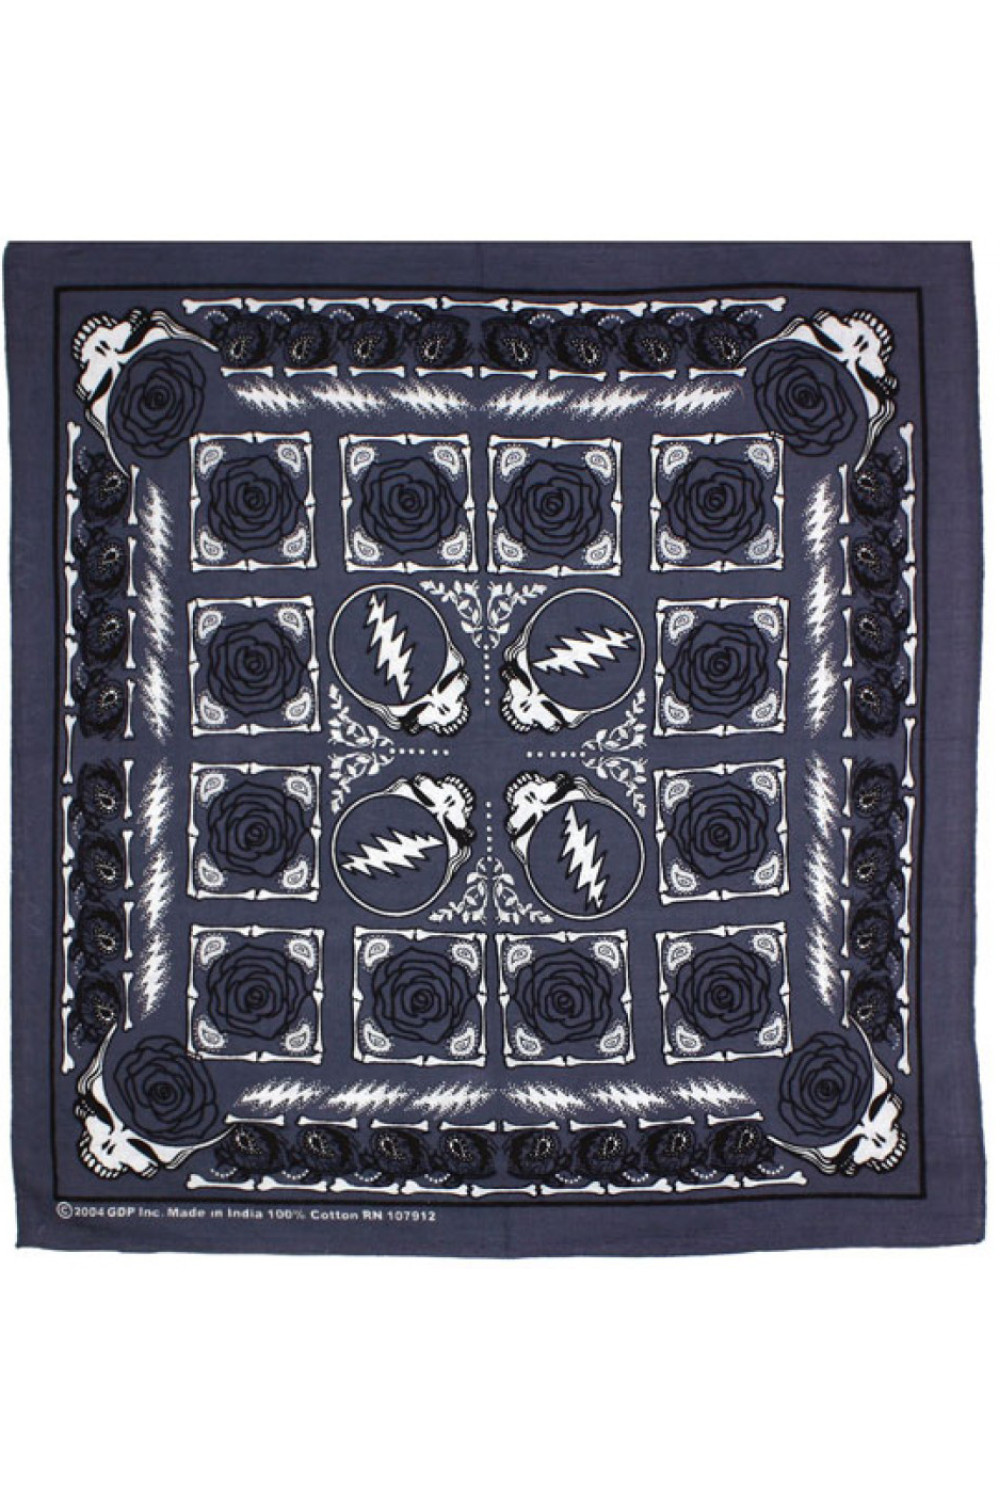 Grateful Dead SYF & Roses Bandana Grey 22x22 **RESERVE NOW FOR AUGUST DELIVERY**  